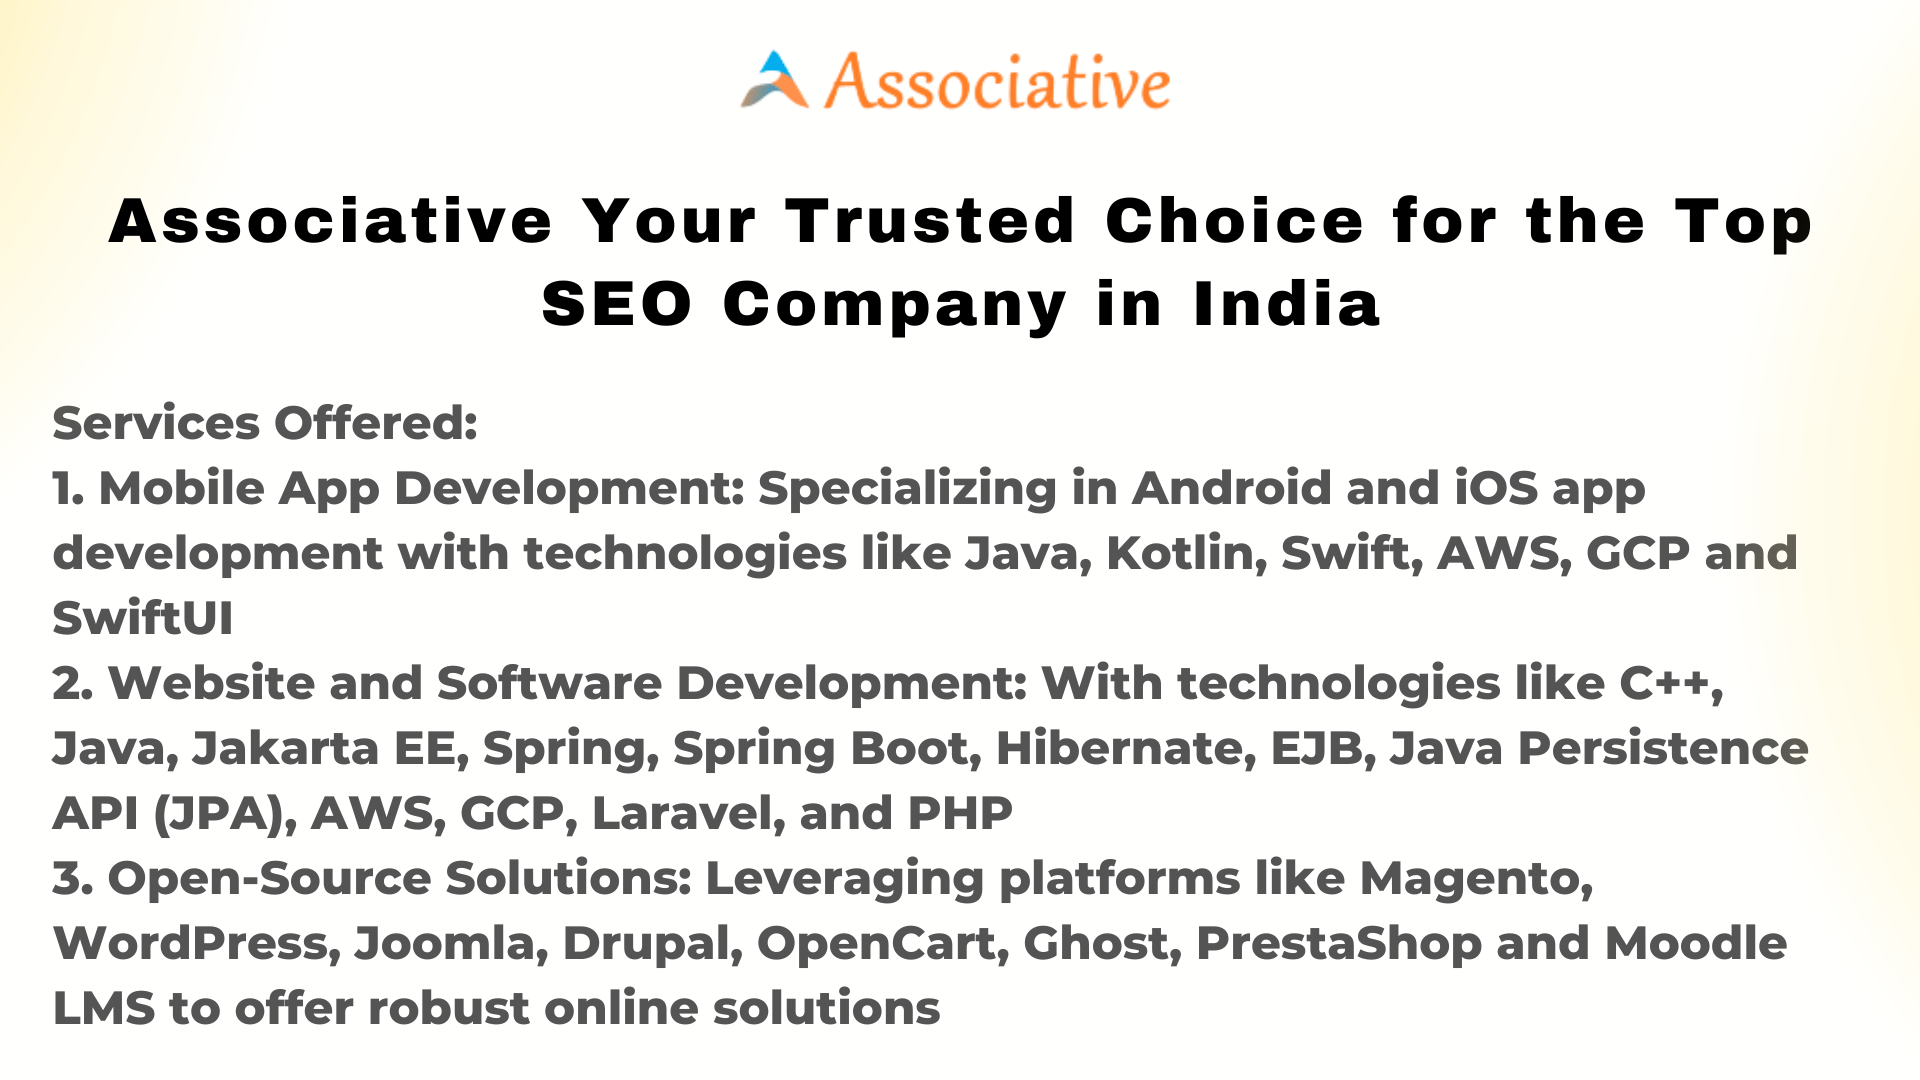 Associative Your Trusted Choice for the Top SEO Company in India